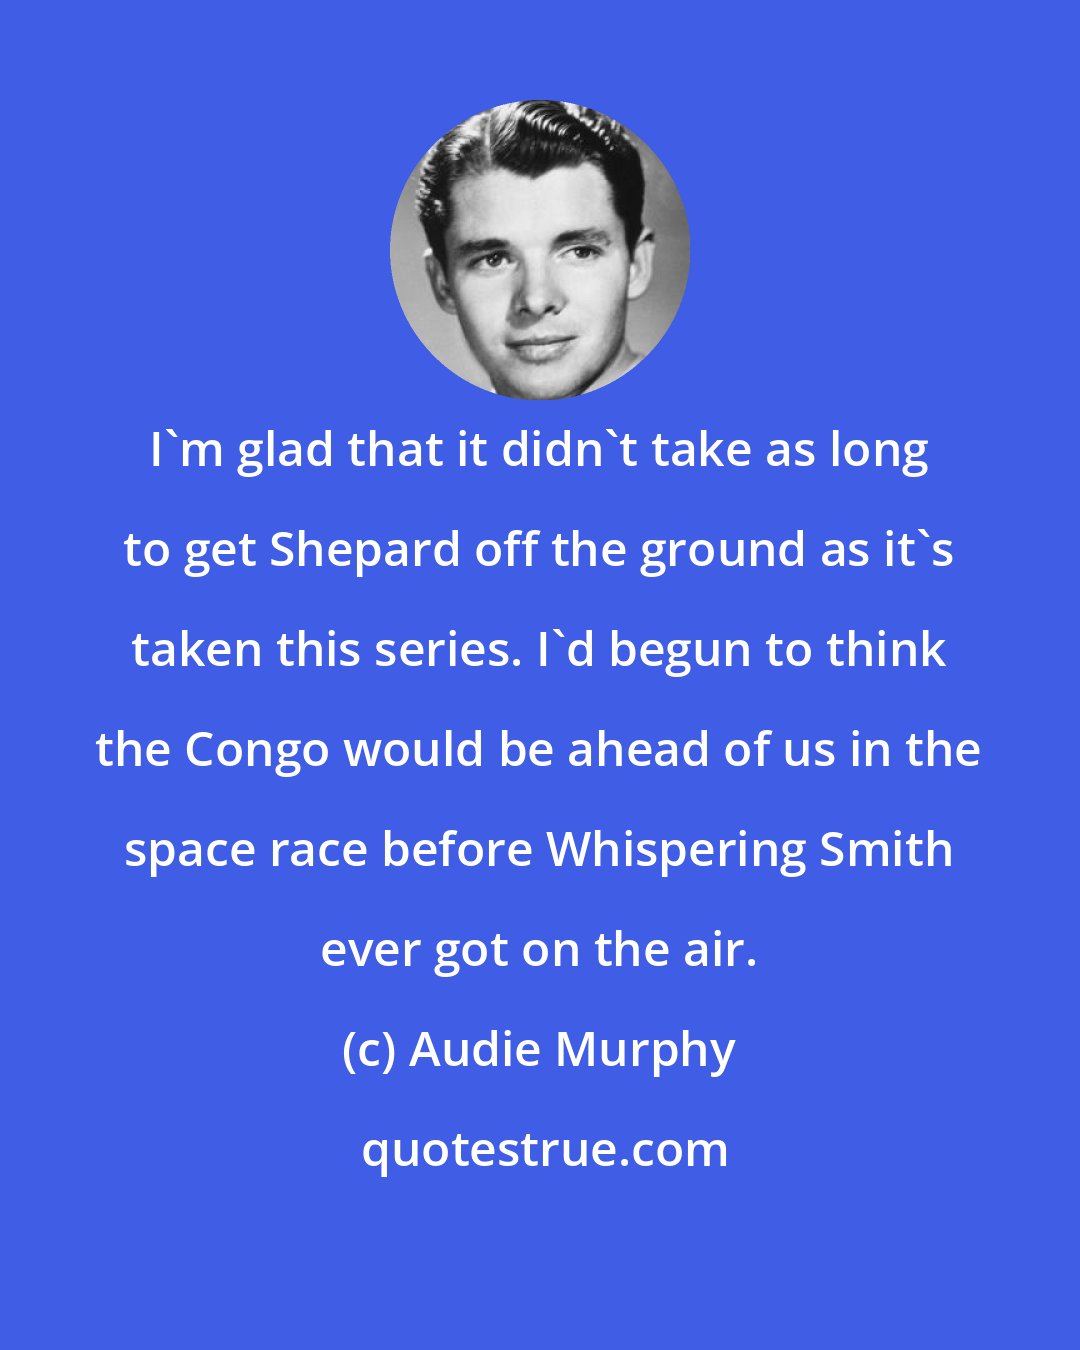 Audie Murphy: I'm glad that it didn't take as long to get Shepard off the ground as it's taken this series. I'd begun to think the Congo would be ahead of us in the space race before Whispering Smith ever got on the air.